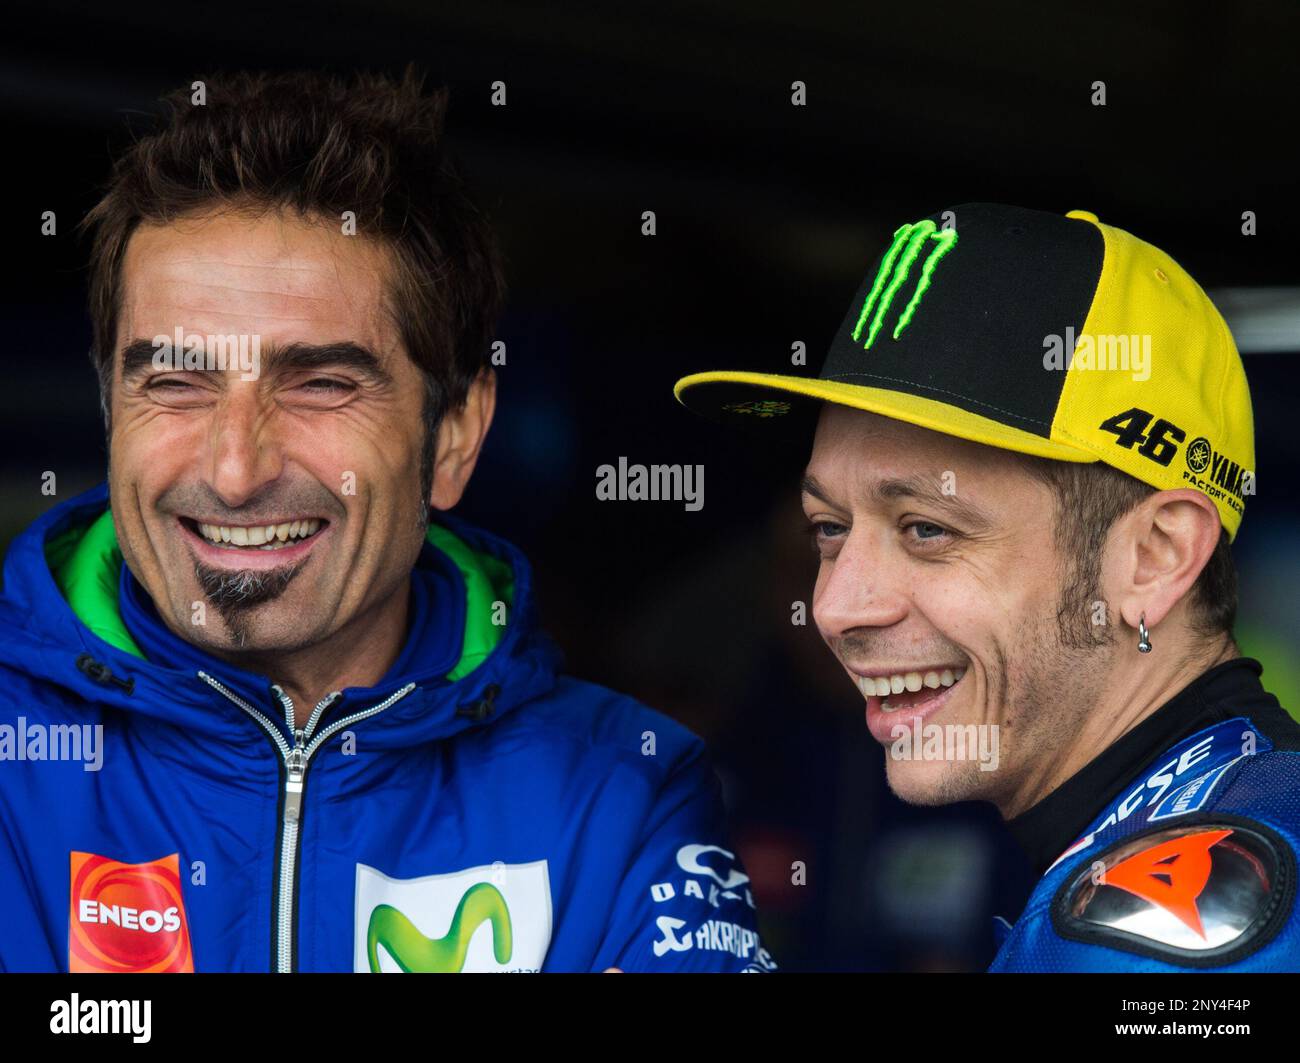 October 21, 2017 - Melbourne, Victoria, Australia - Italian rider Valentino  Rossi (#46) of Movistar Yamaha MotoGP (R) has a laugh with his data engineer  Matteo Flamigni (L) before the third free